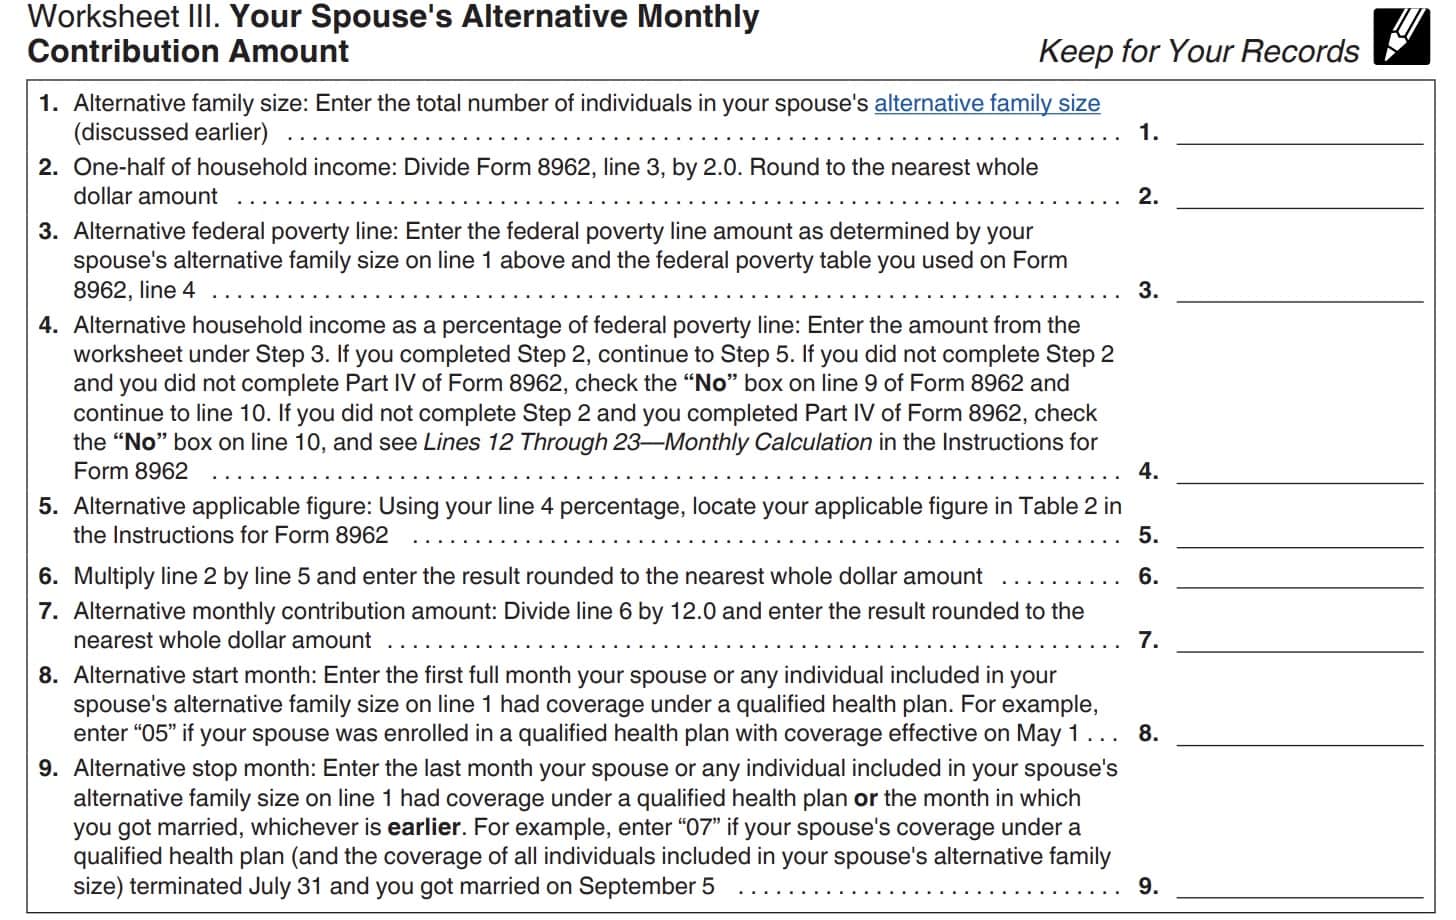 irs publication 974, worksheet III: spouse's alternative monthly contribution amount